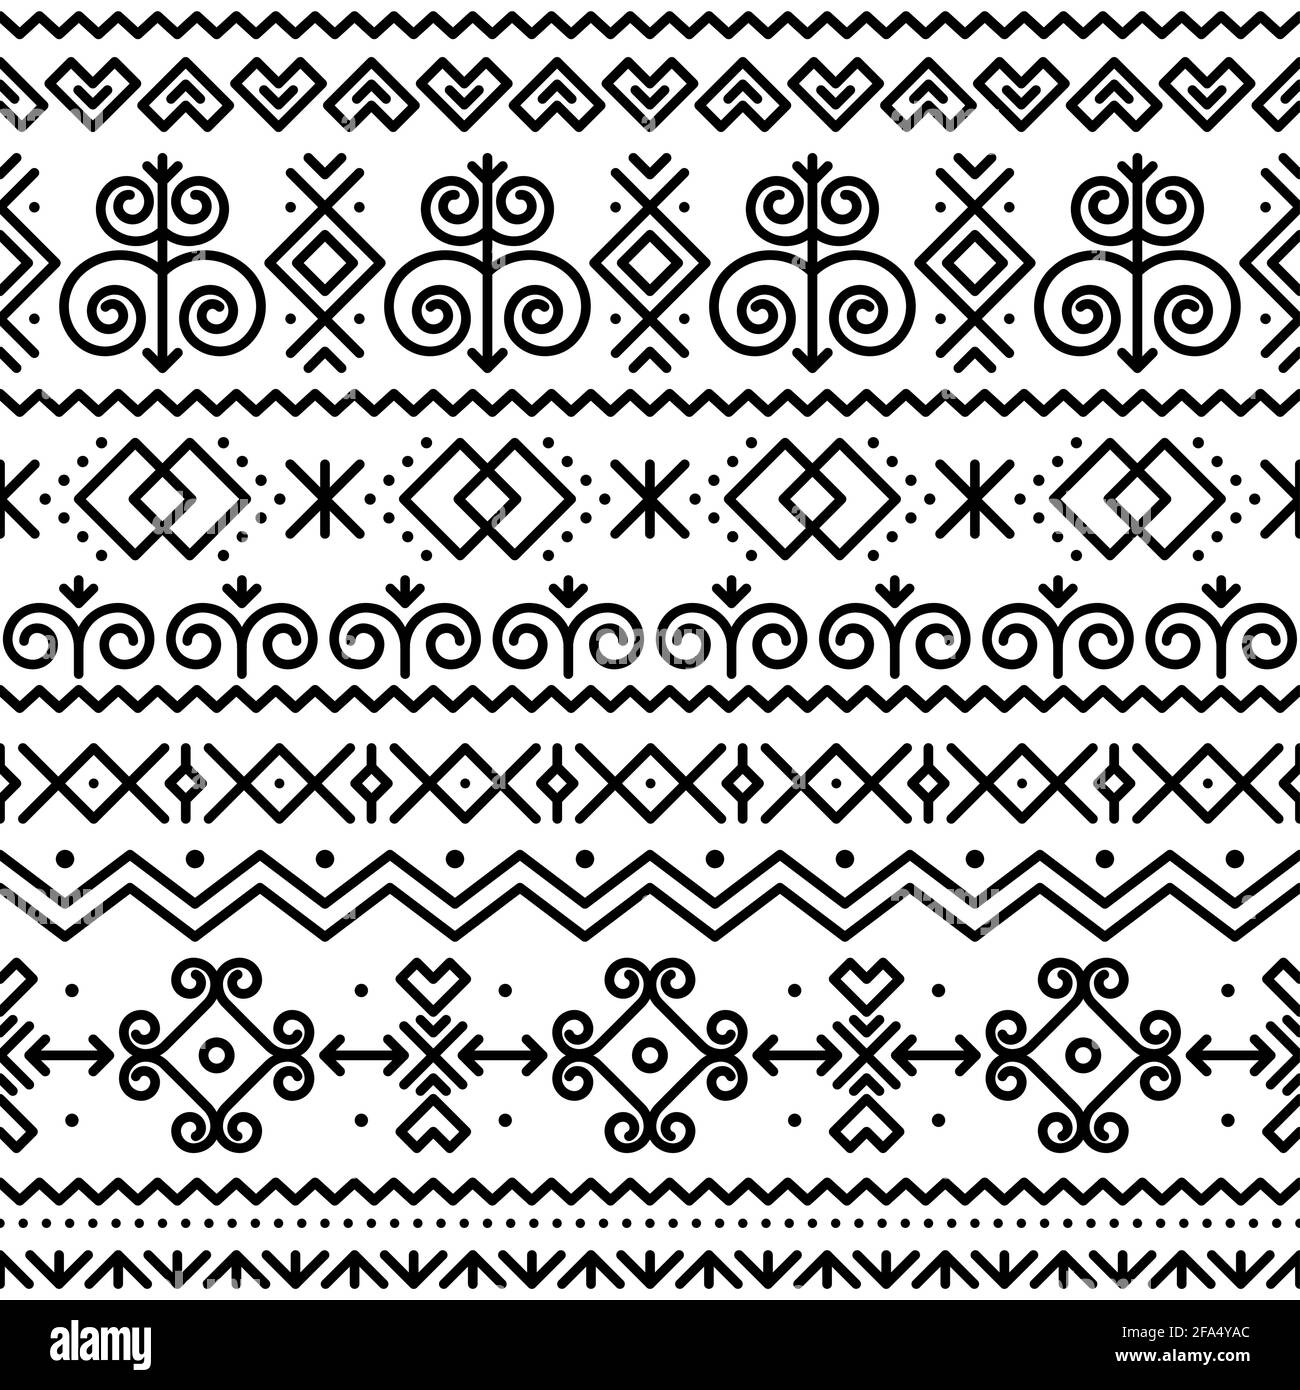 Slovak folk art vector seamless black pattern with abstract geometric shapes inspired by traditional house paintings from village Cicmany in Zilina re Stock Vector